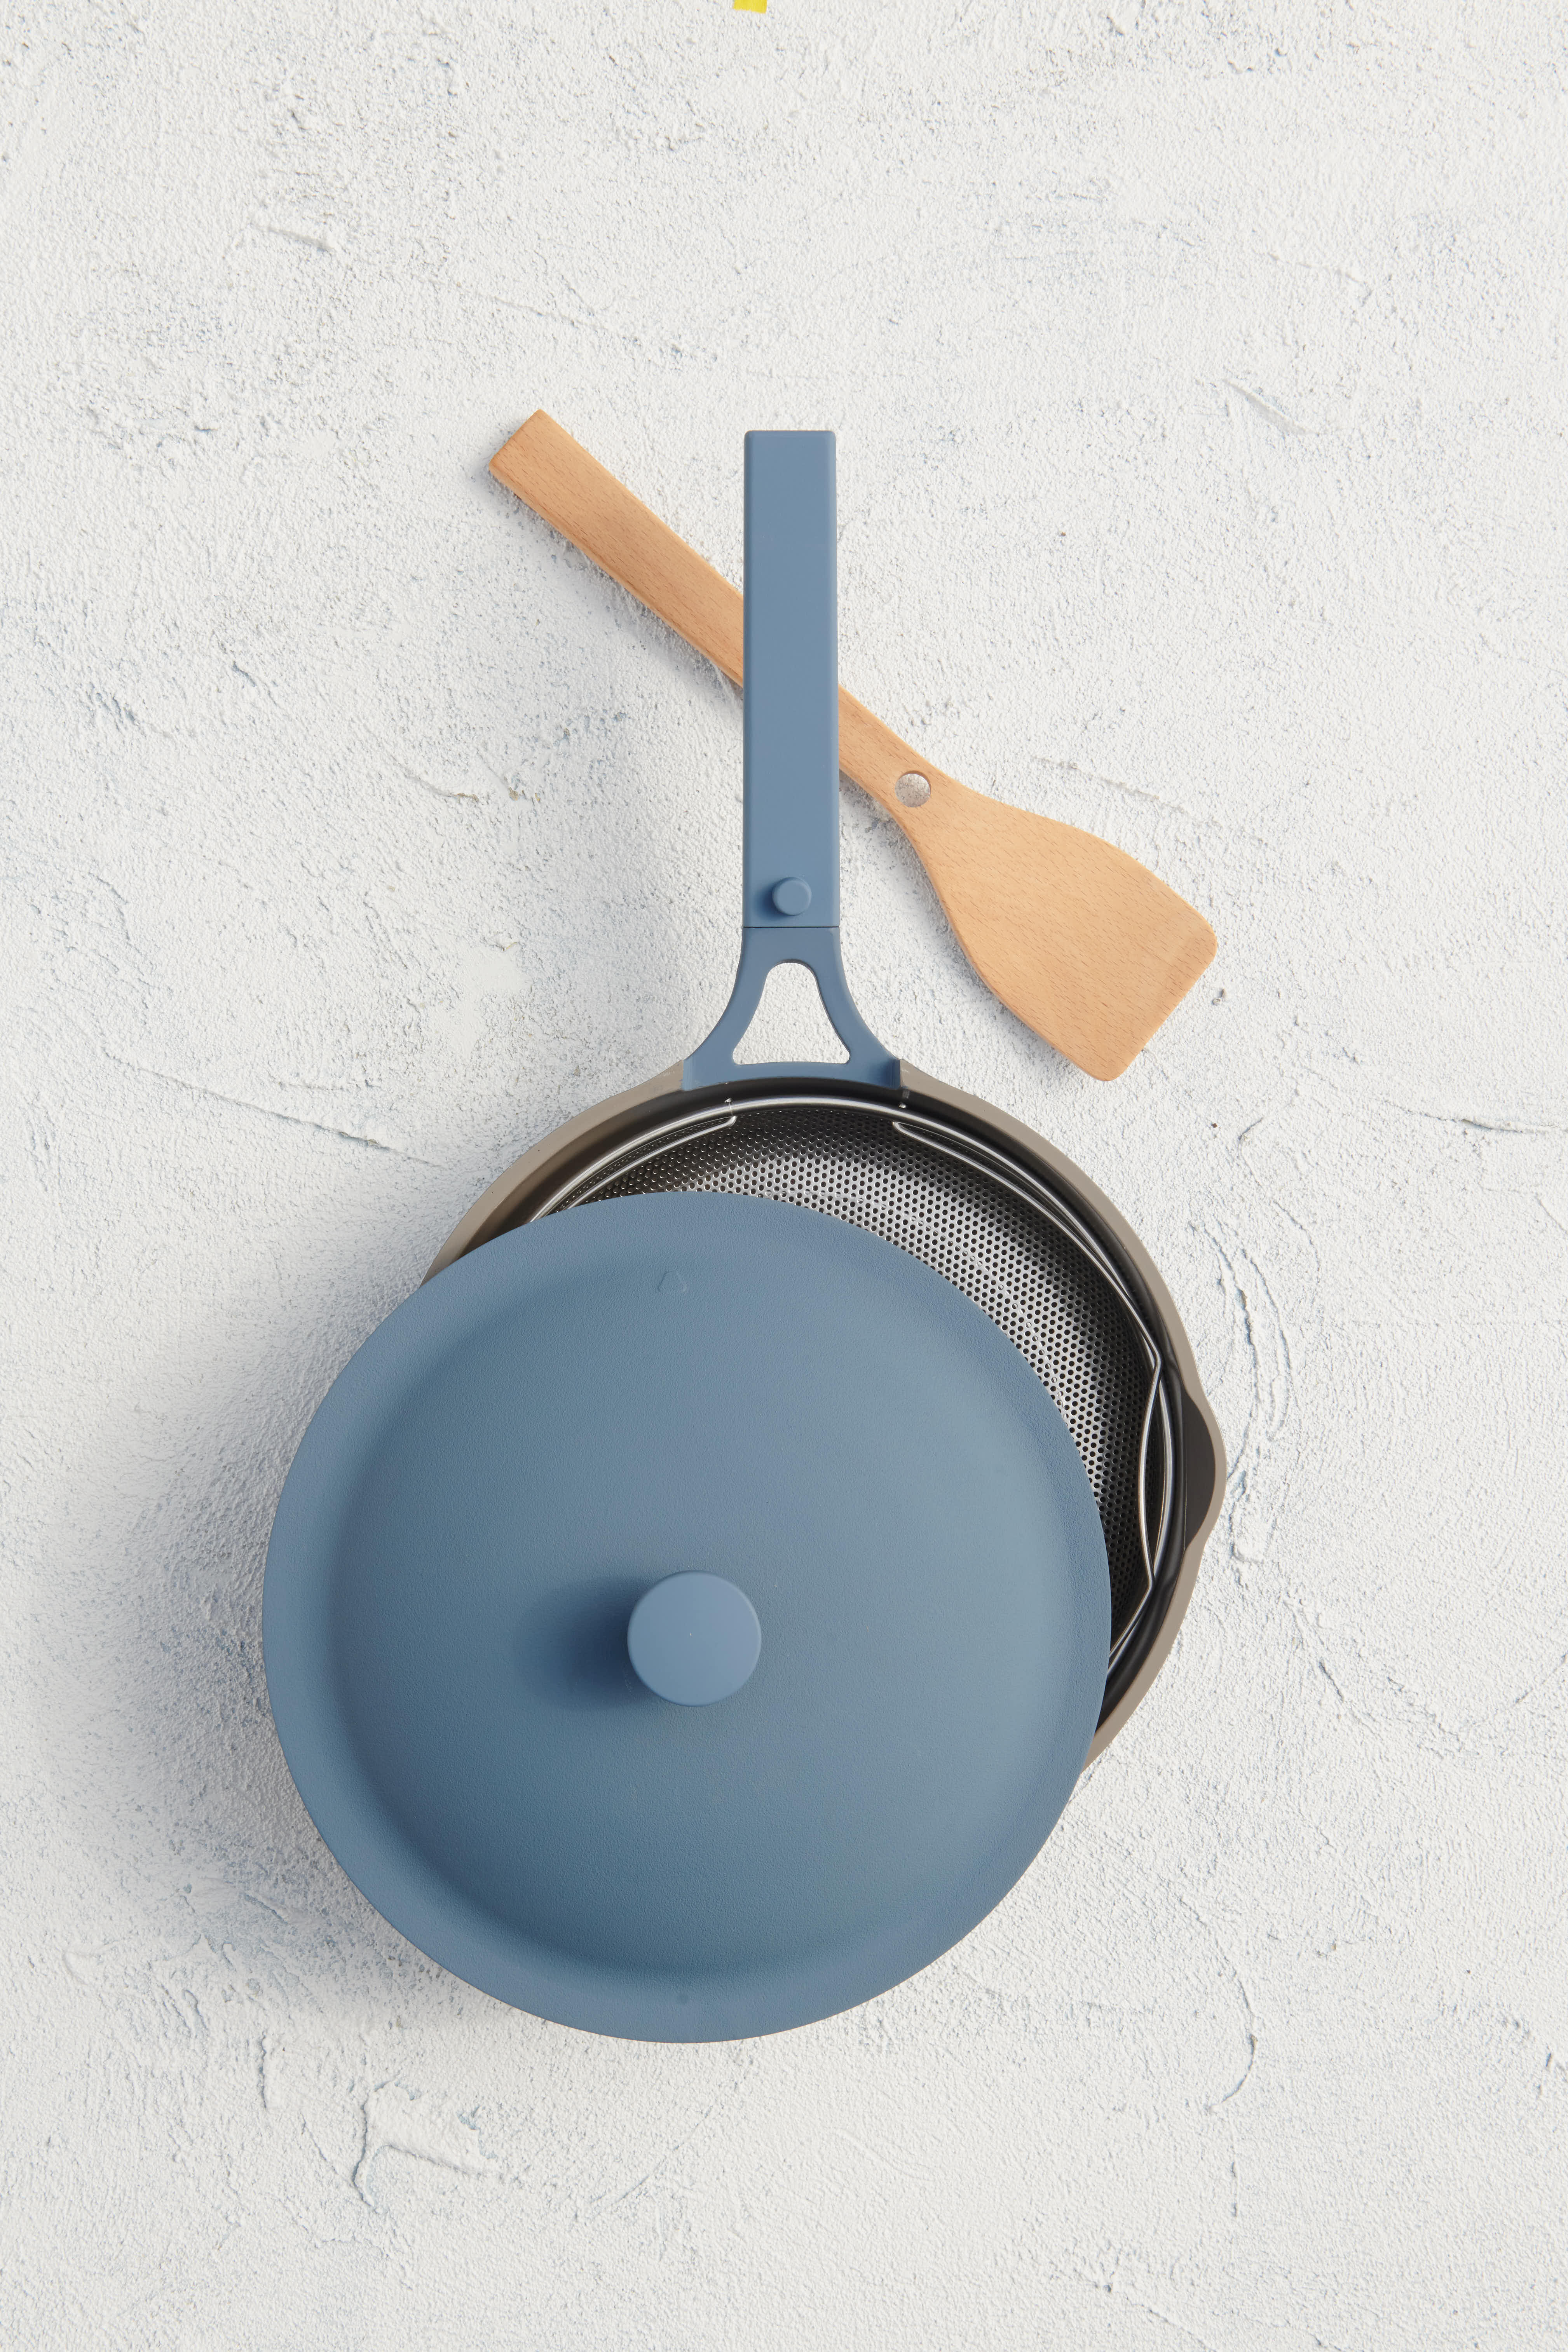 Our Place Always Pan Launches Blue Salt Colored Cookware: October 